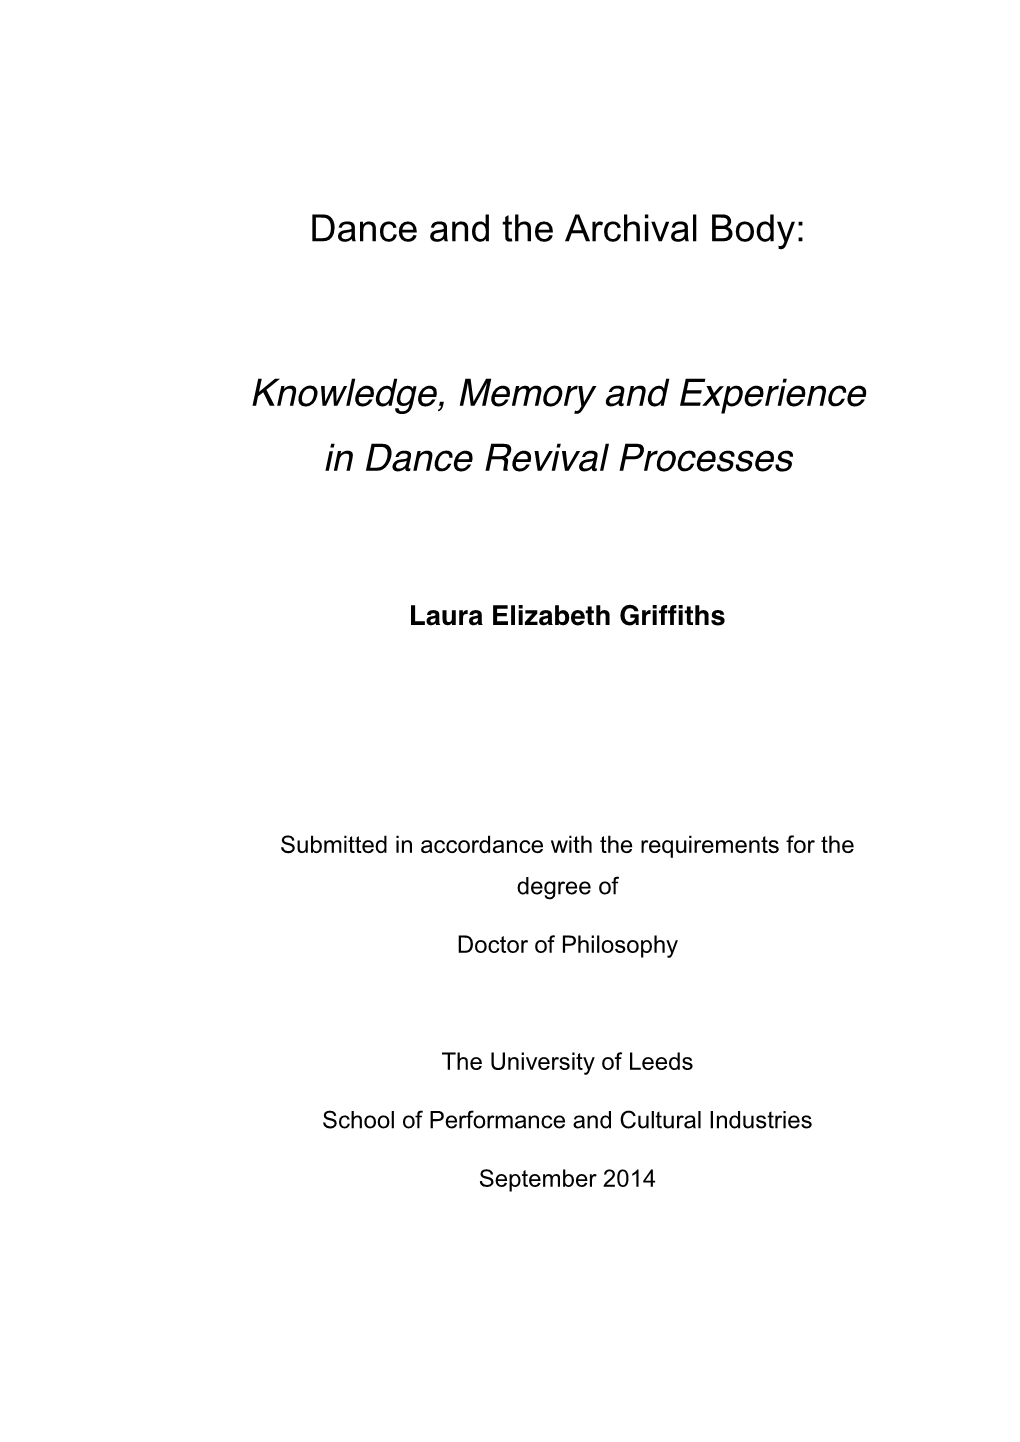 Knowledge, Memory and Experience in Dance Revival Processes